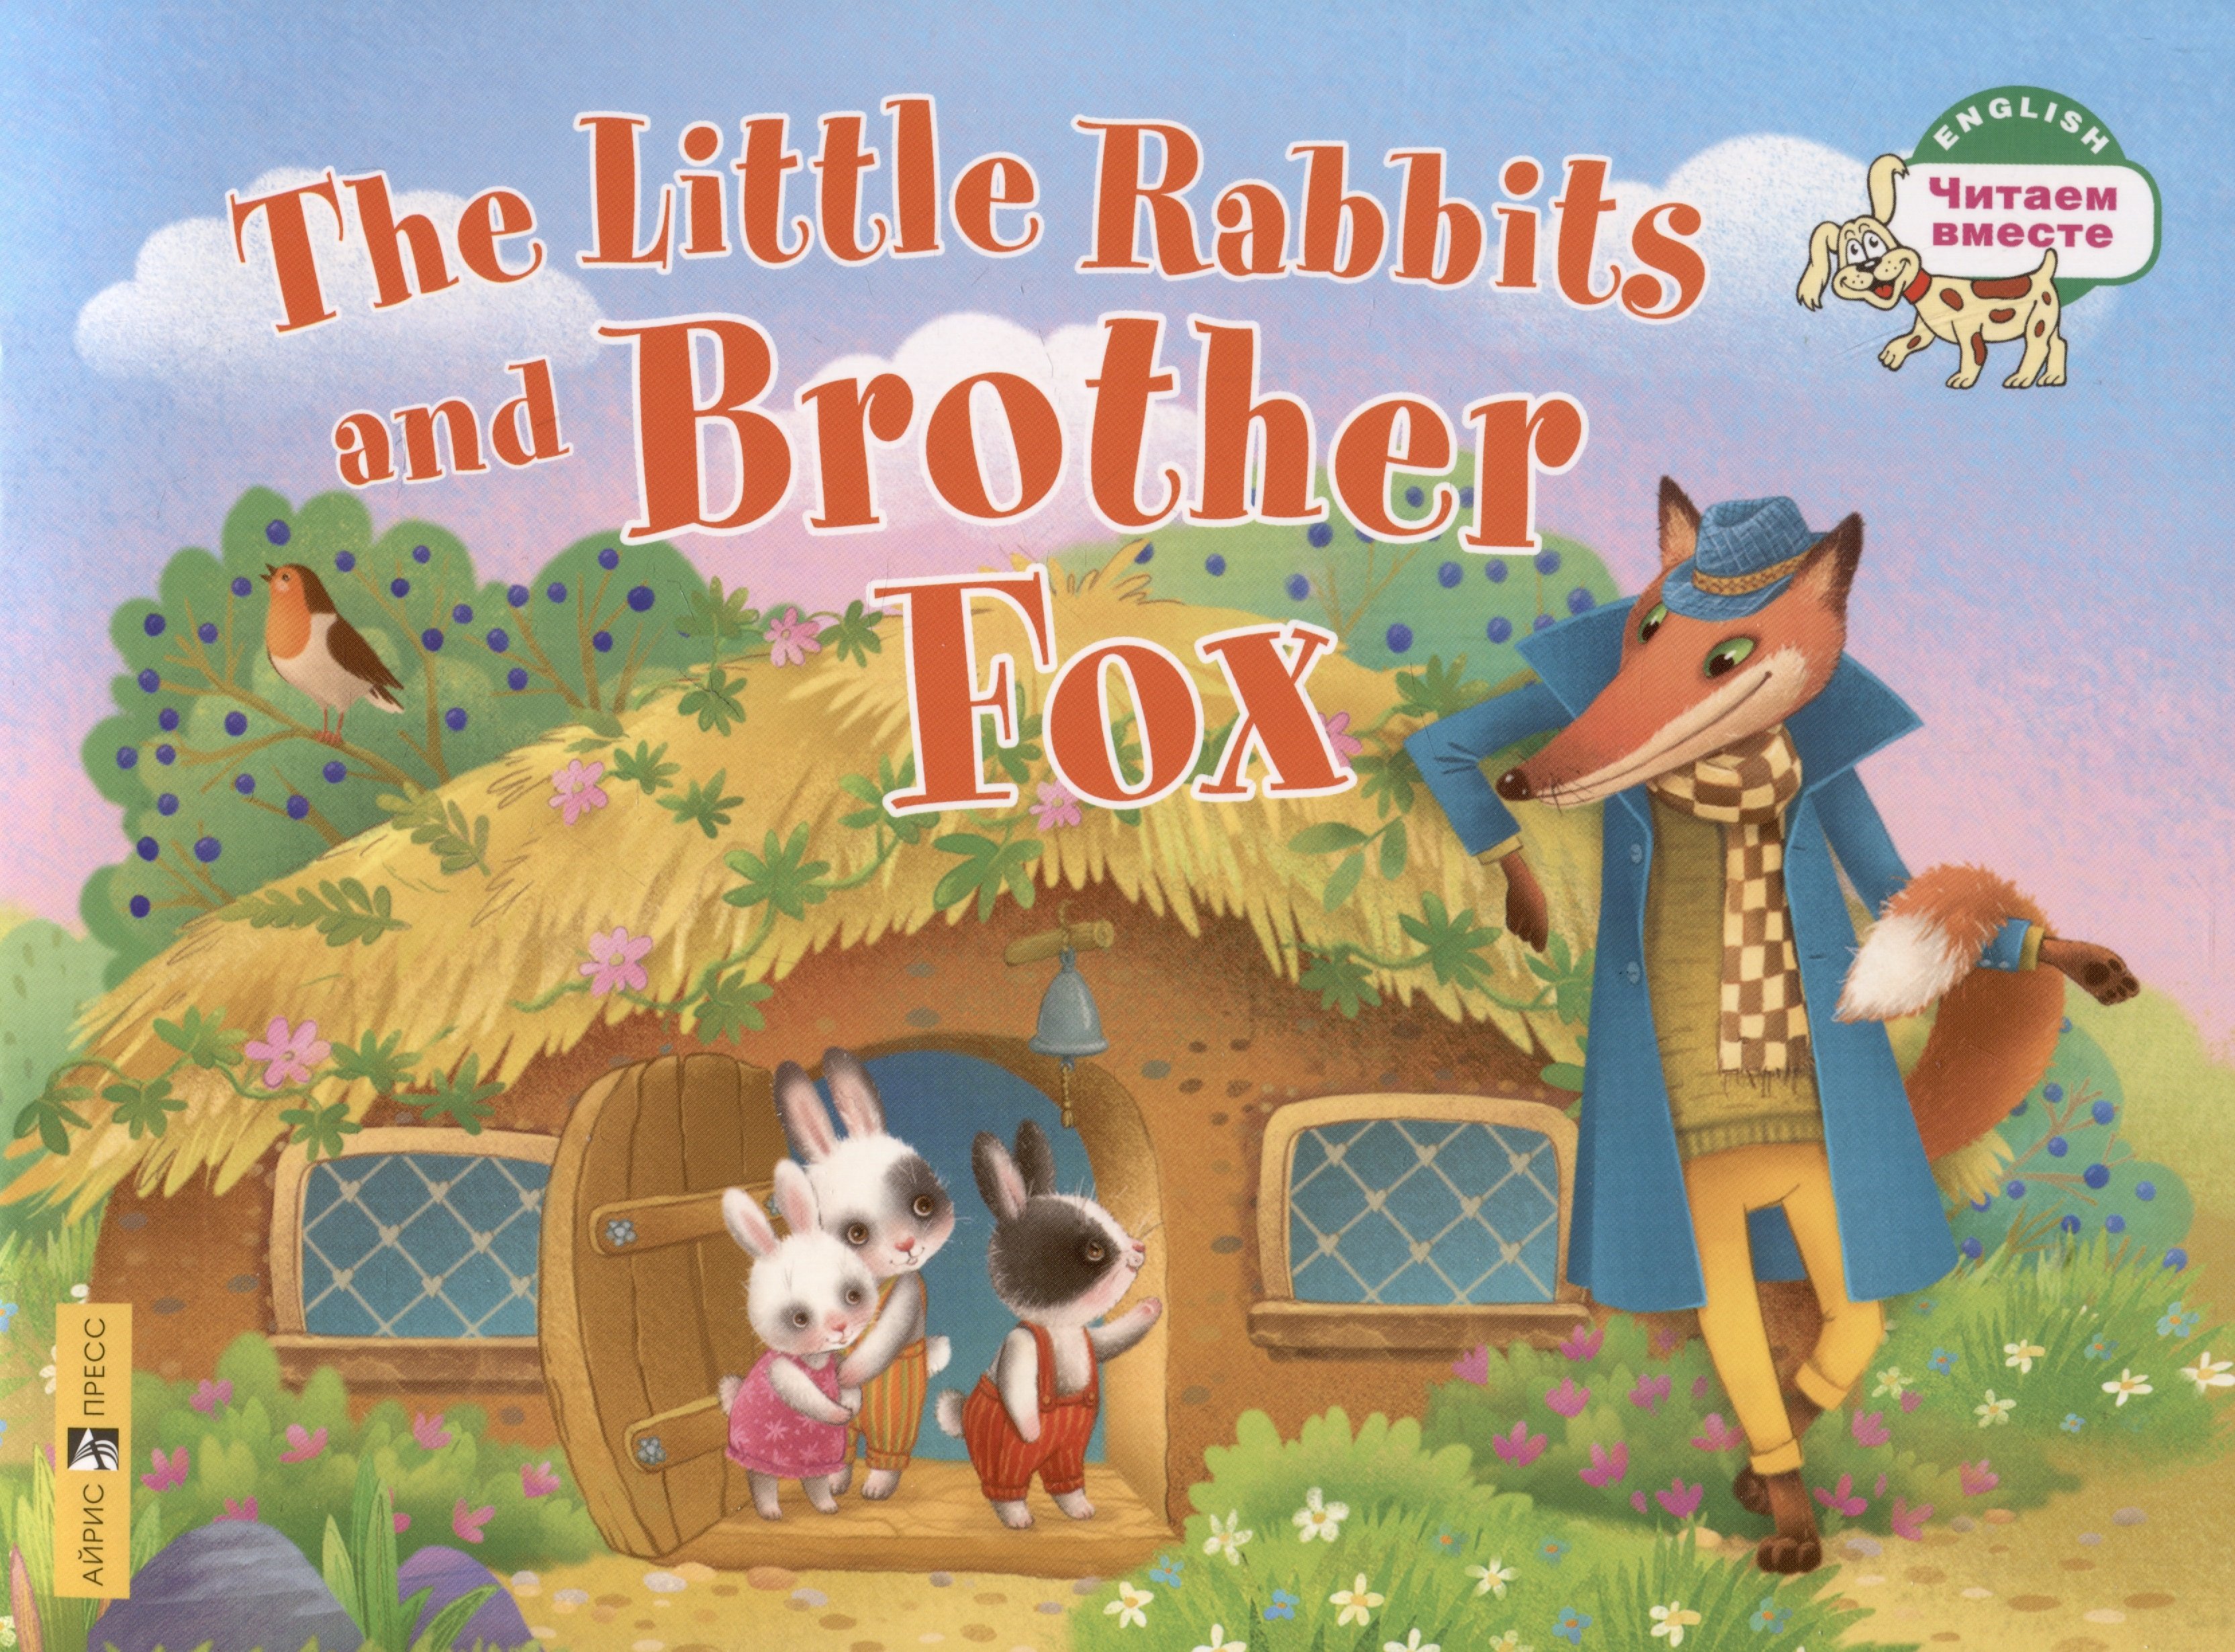      / he Little Rabbits and Brother Fox. 1 